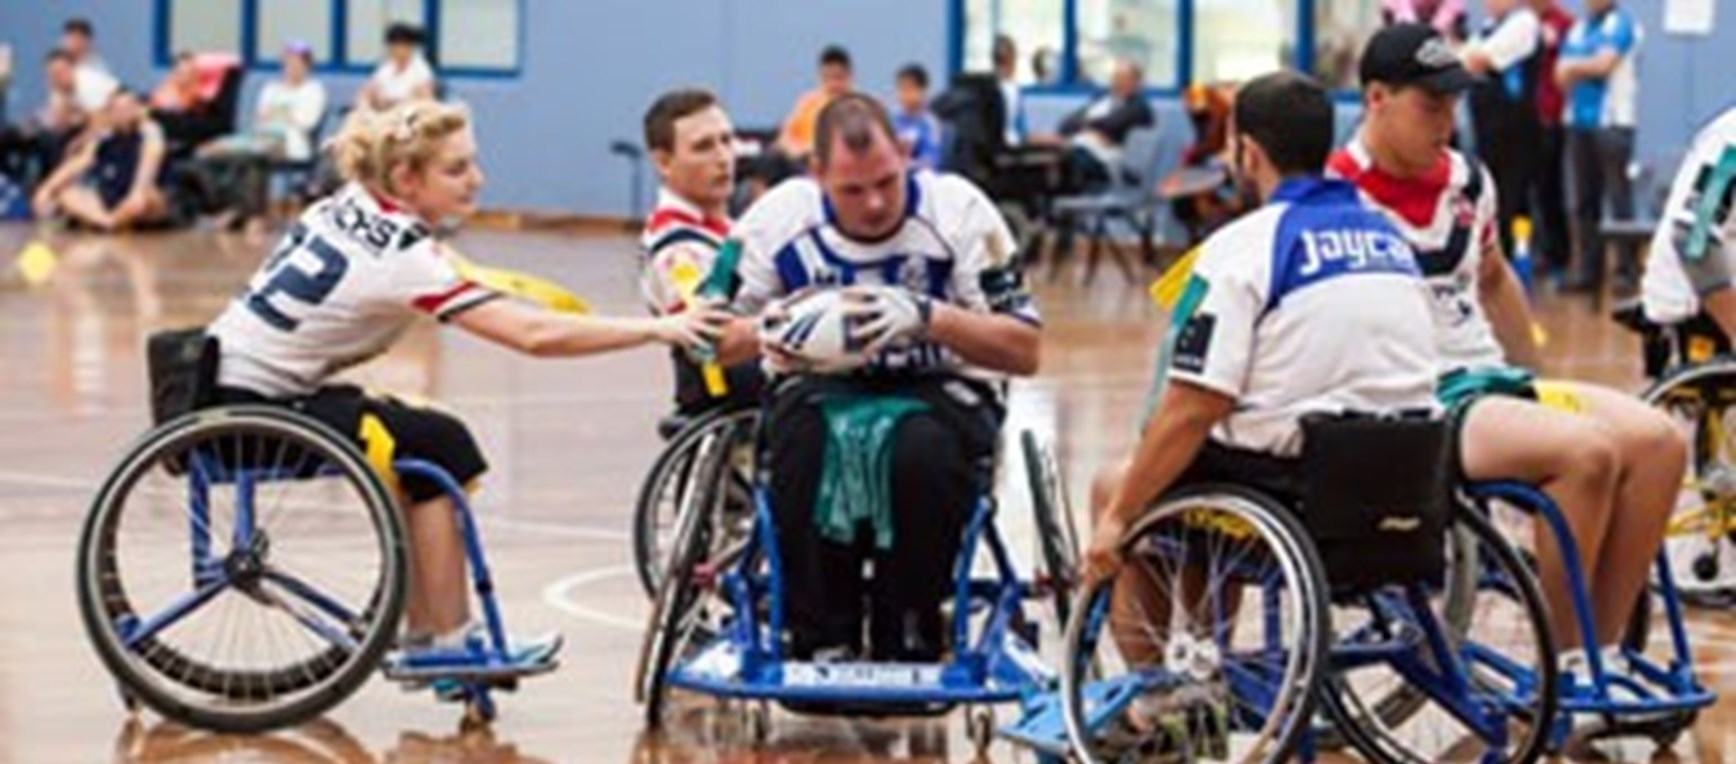 Passionate Supporters Excel in Wheelchair Rugby League